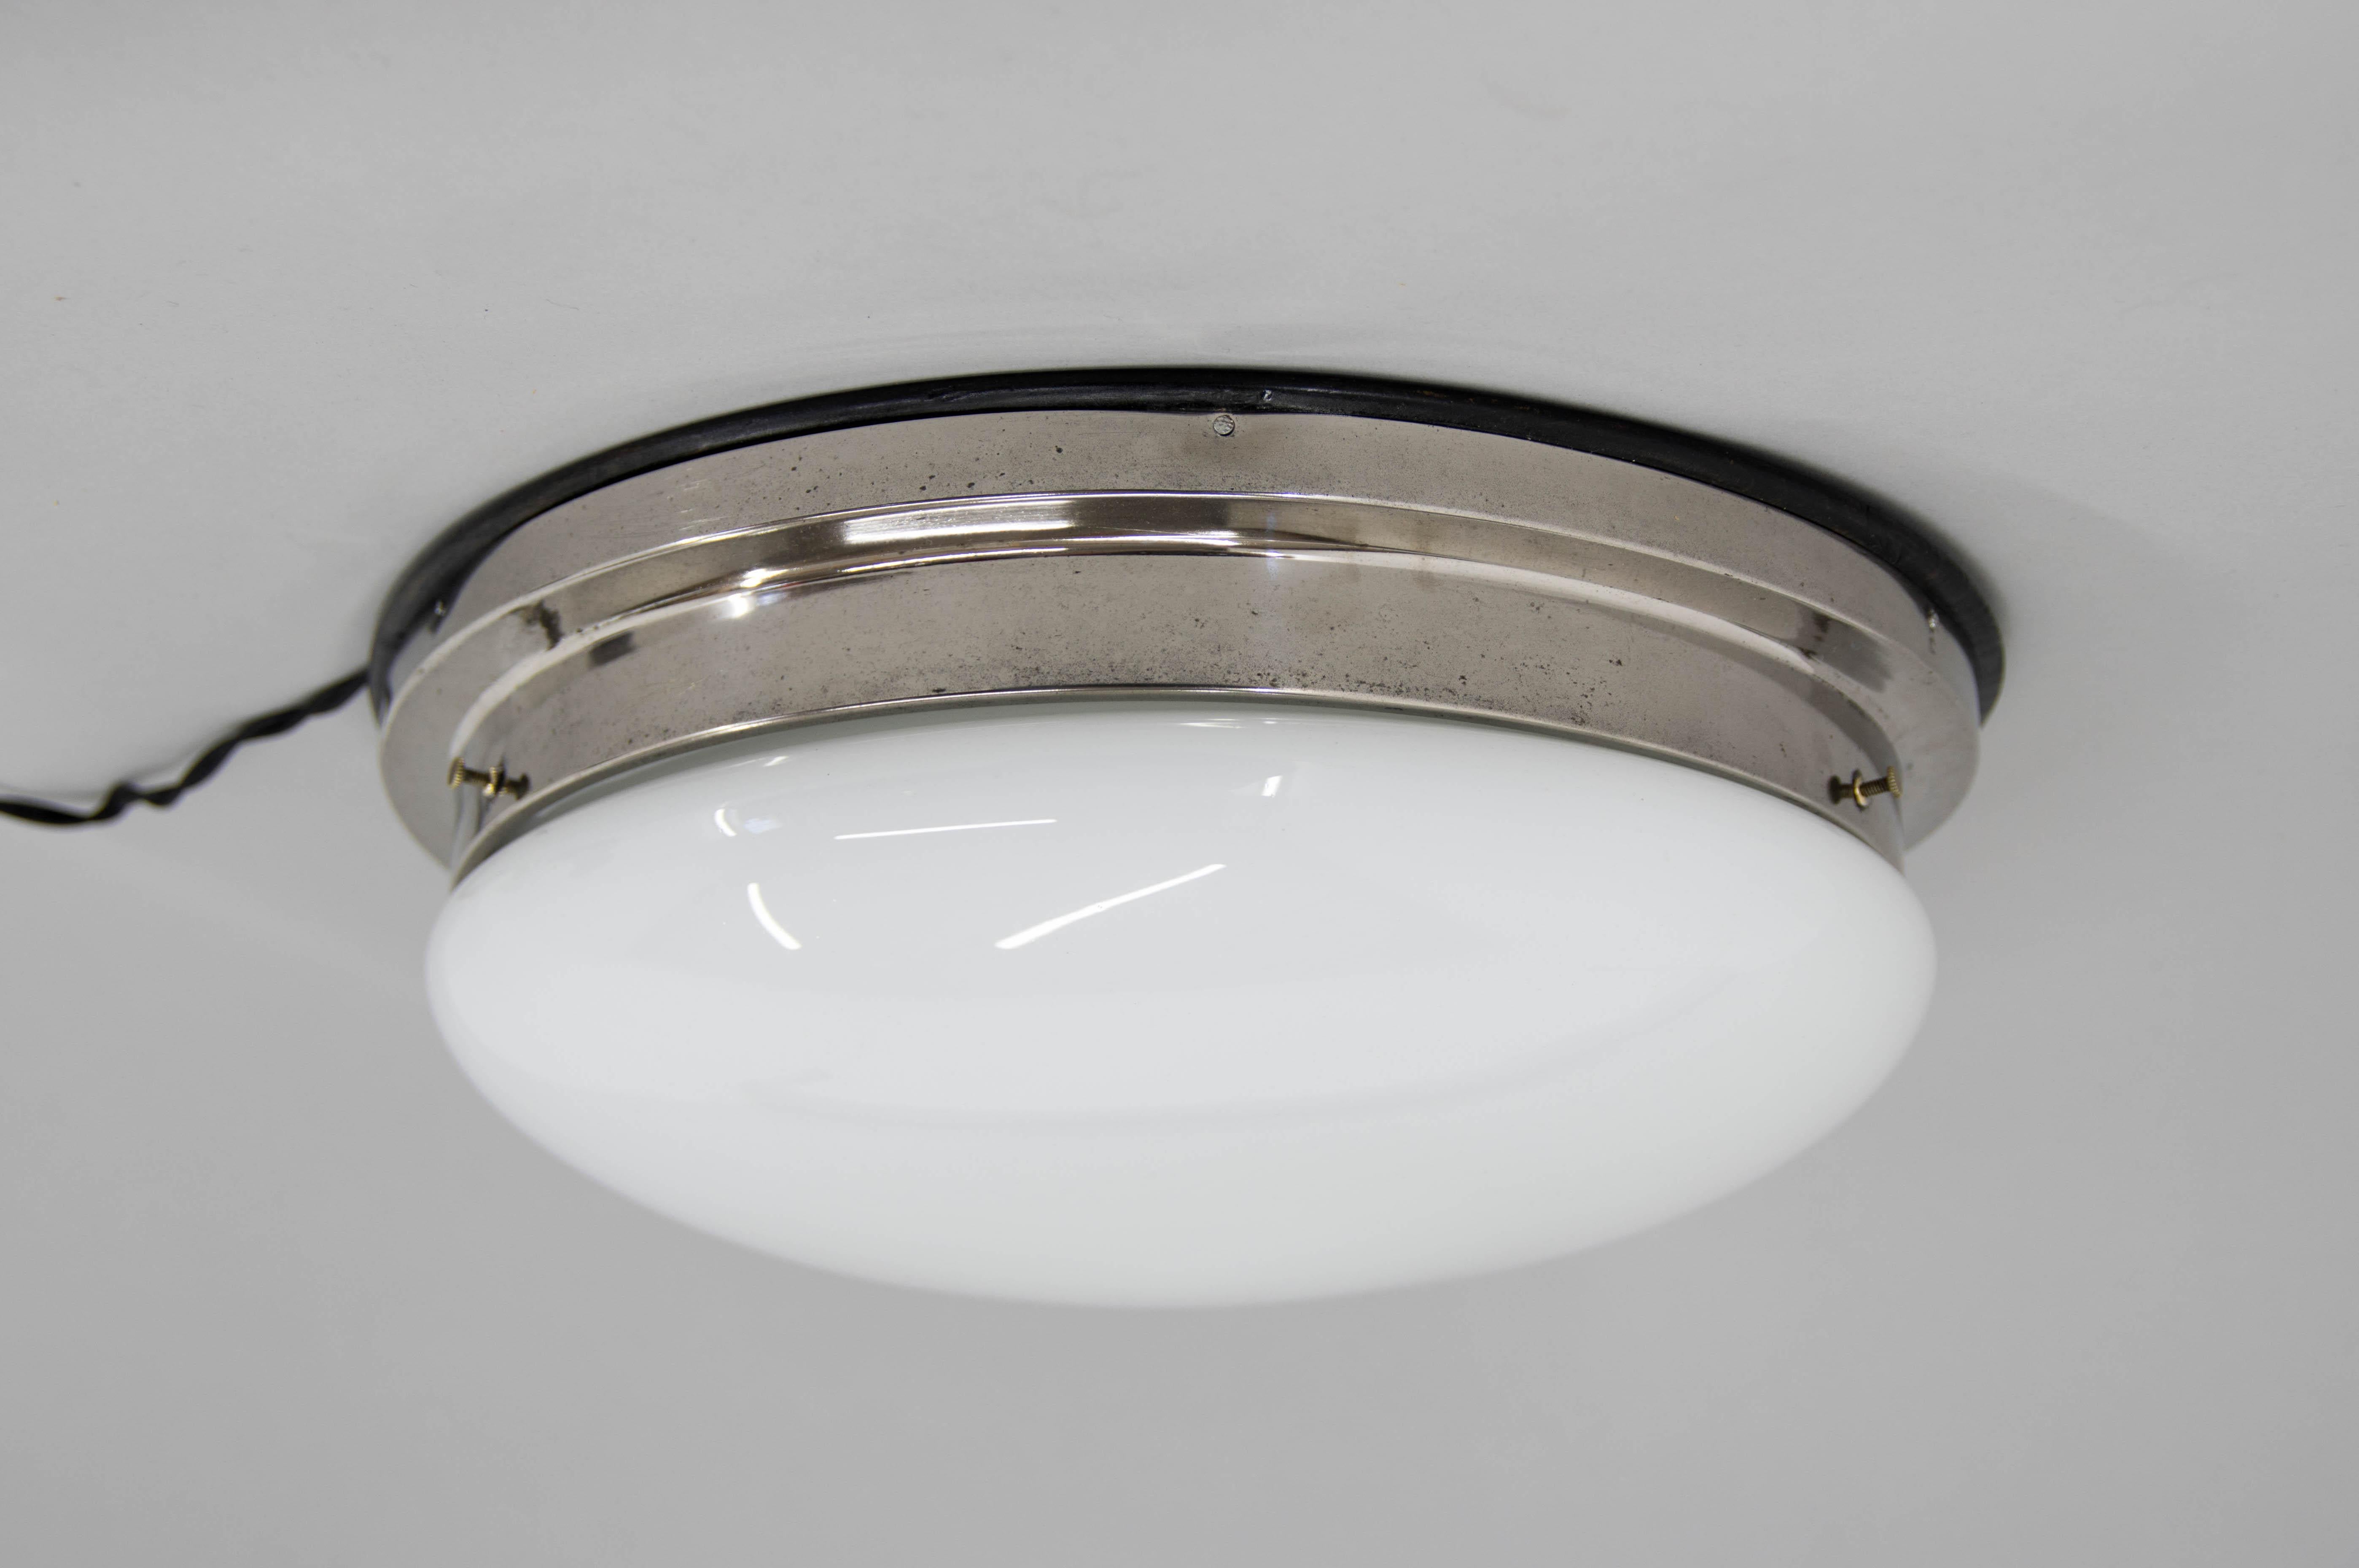 Beautiful clean and simple Art Deco flush mount or wall light.
Carefully restored: wood refinished, nickel polished, opaline glass with minor dents on the edge, not visible when mounted, rewired:
1x100W, E25-E27 bulb
US wiring compatible